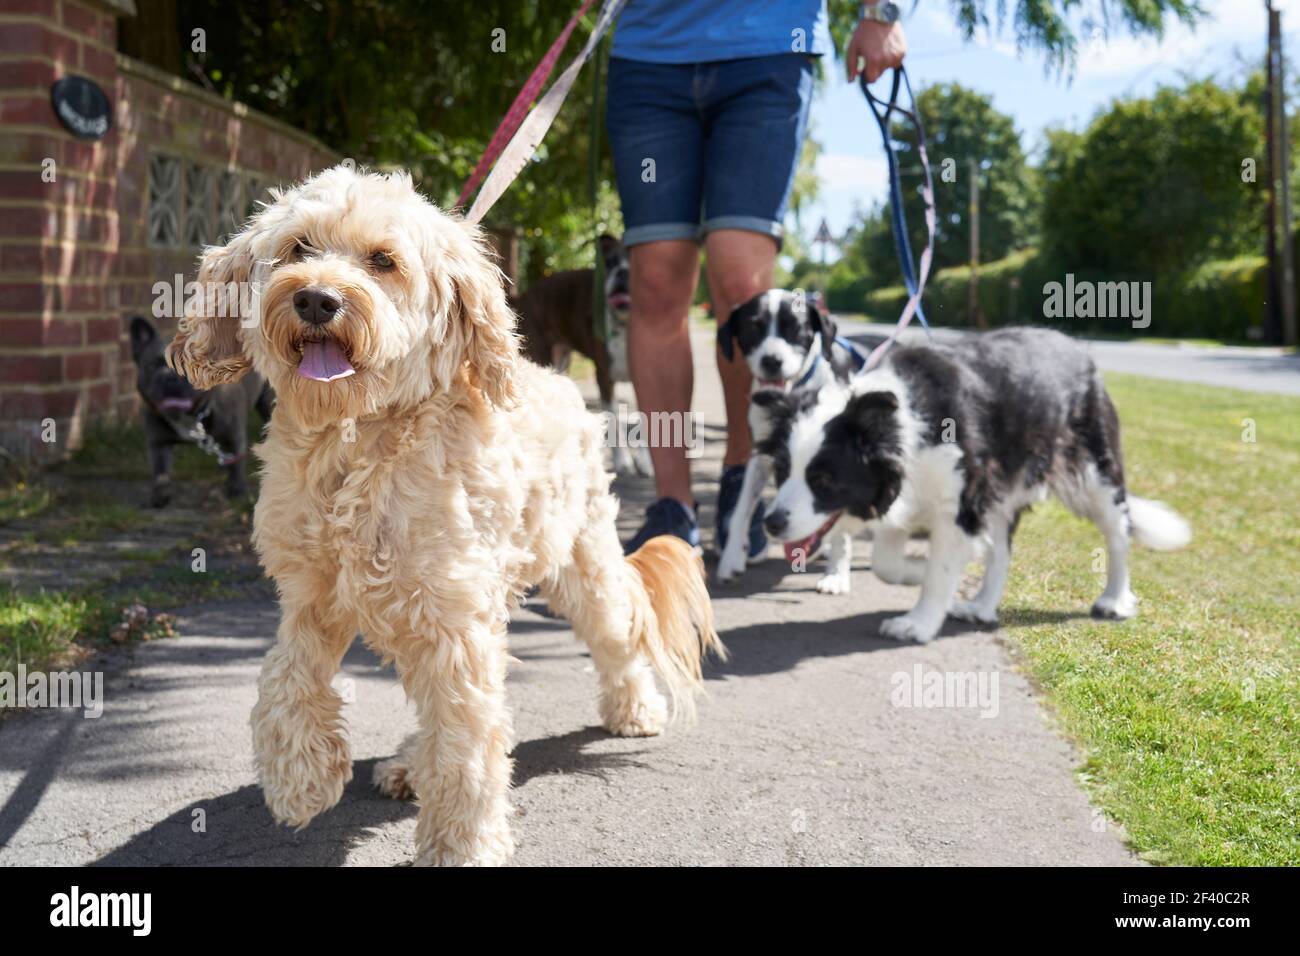 Close up of cockapoo pet dog being walked on suburban street with other dogs by male dog walker Stock Photo